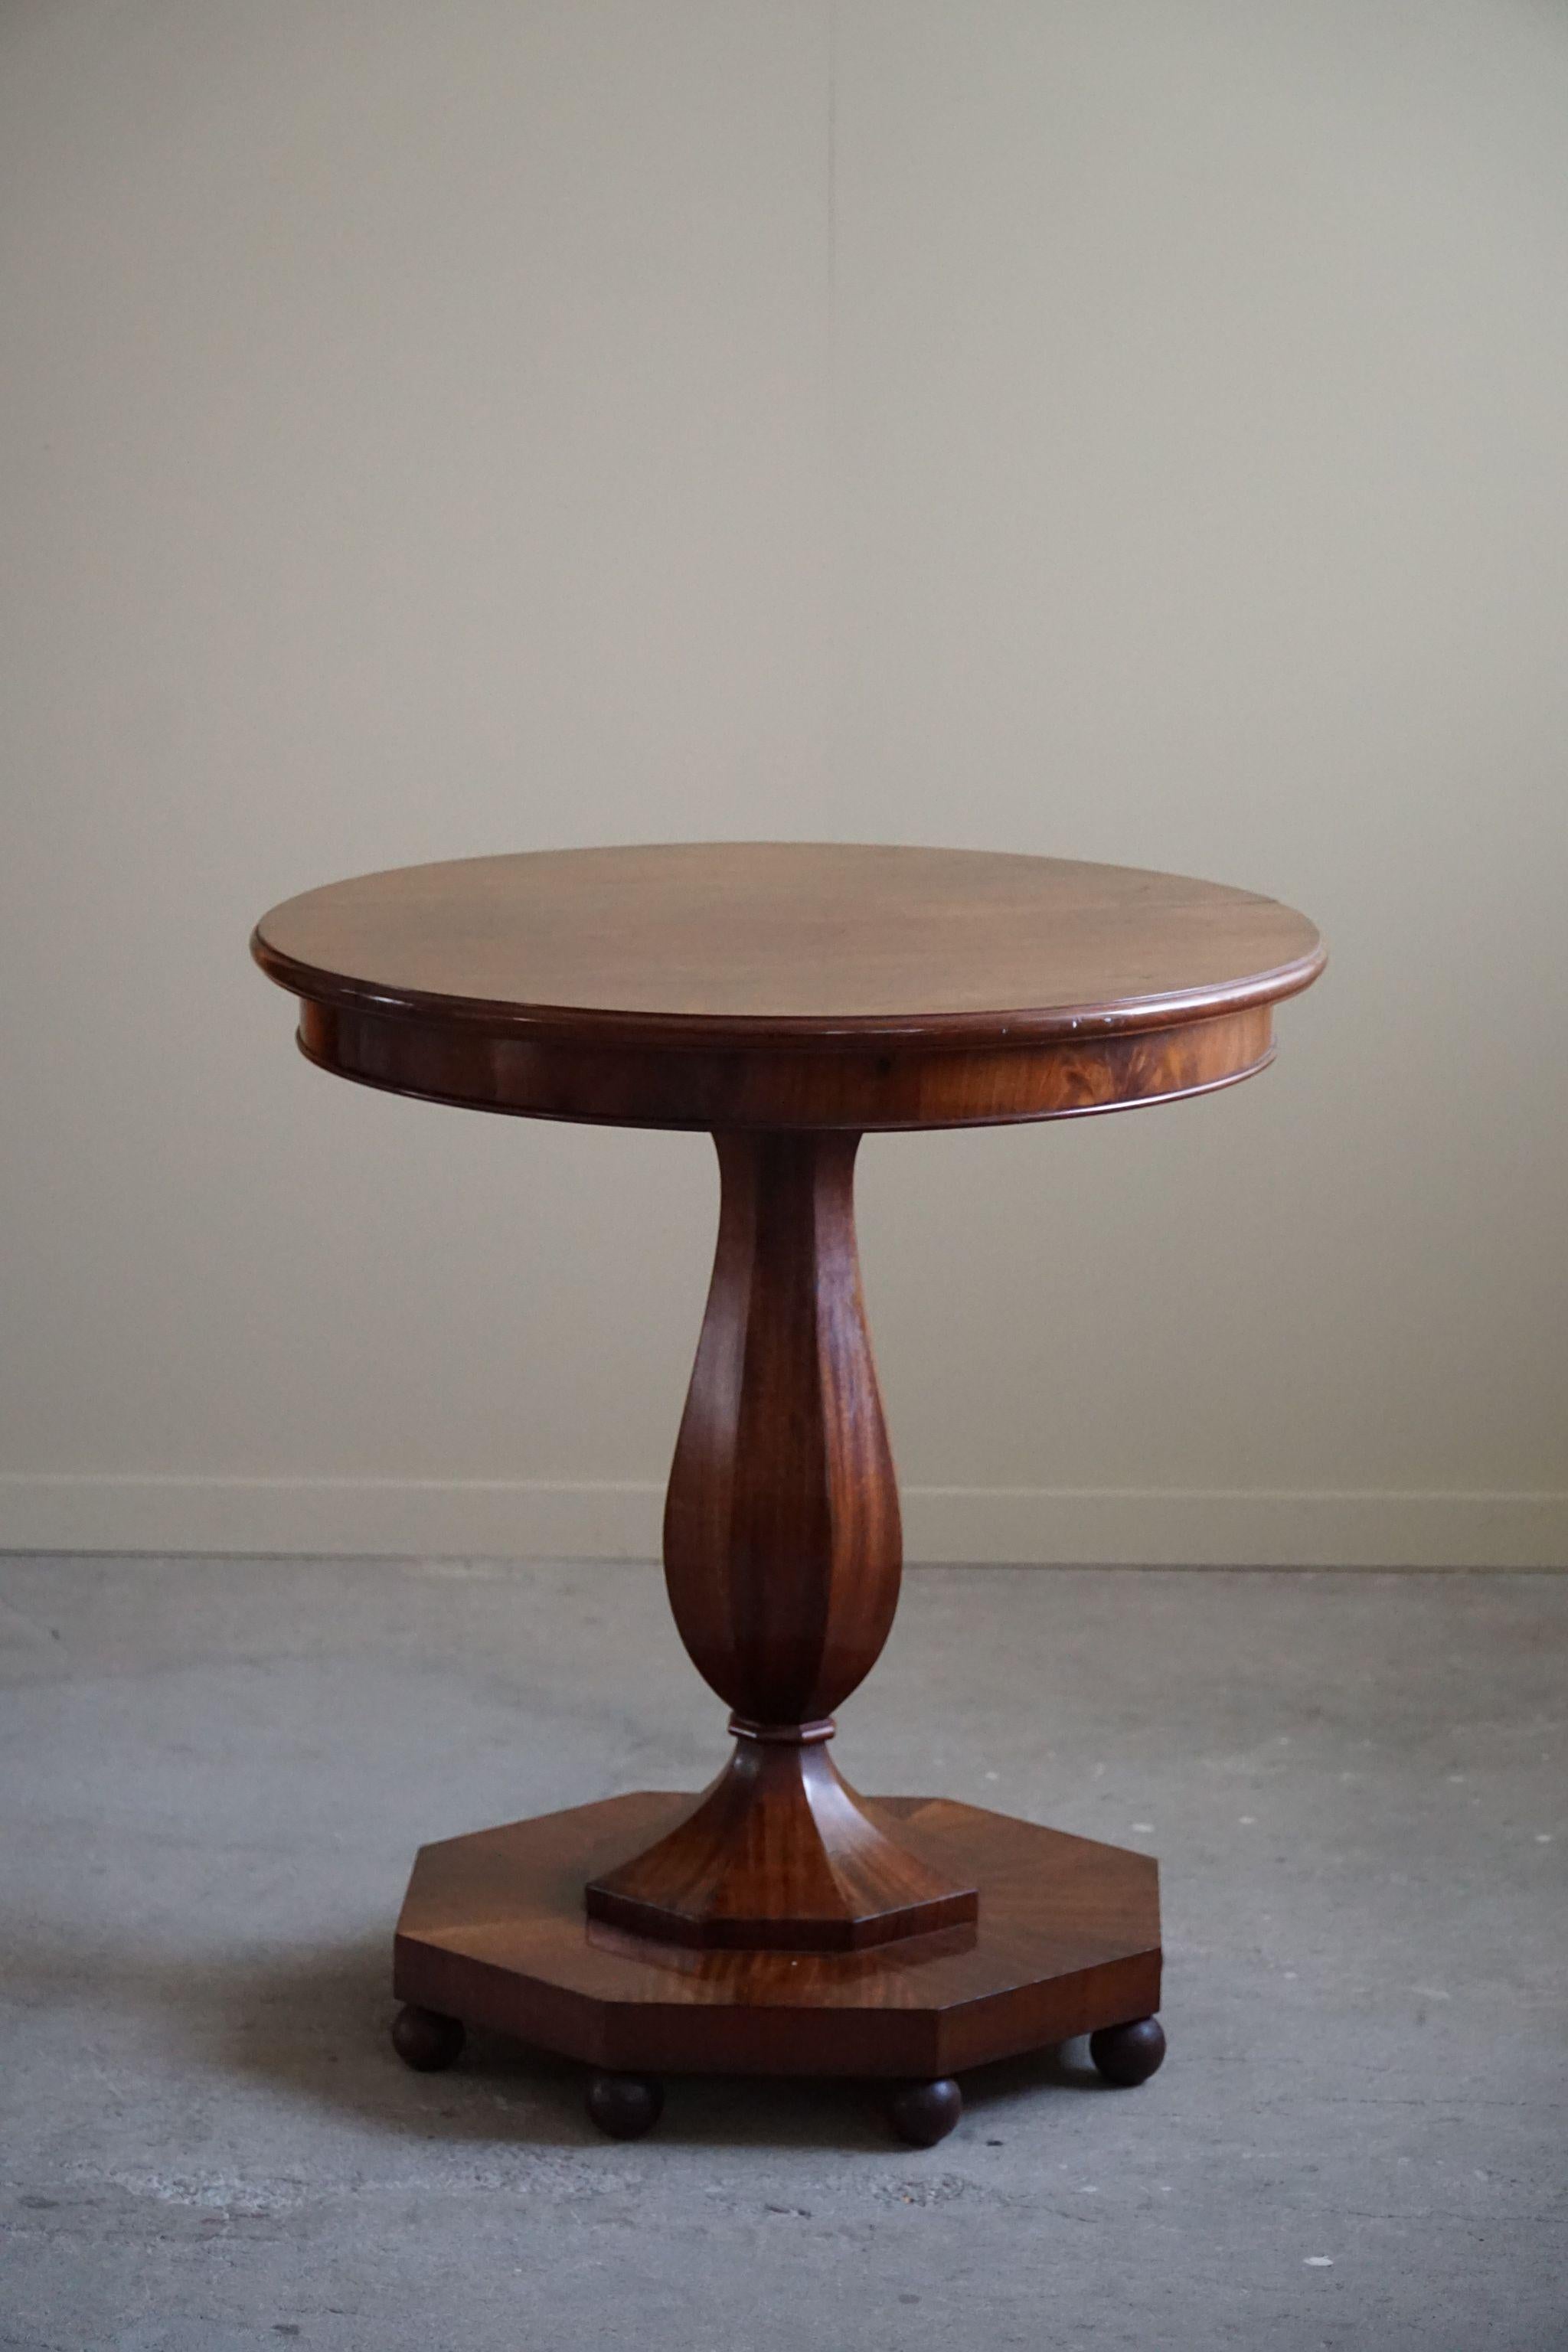 Art Deco, Round Pedestal / Side Table in Walnut, By a Danish Cabinetmaker, 1940s For Sale 7